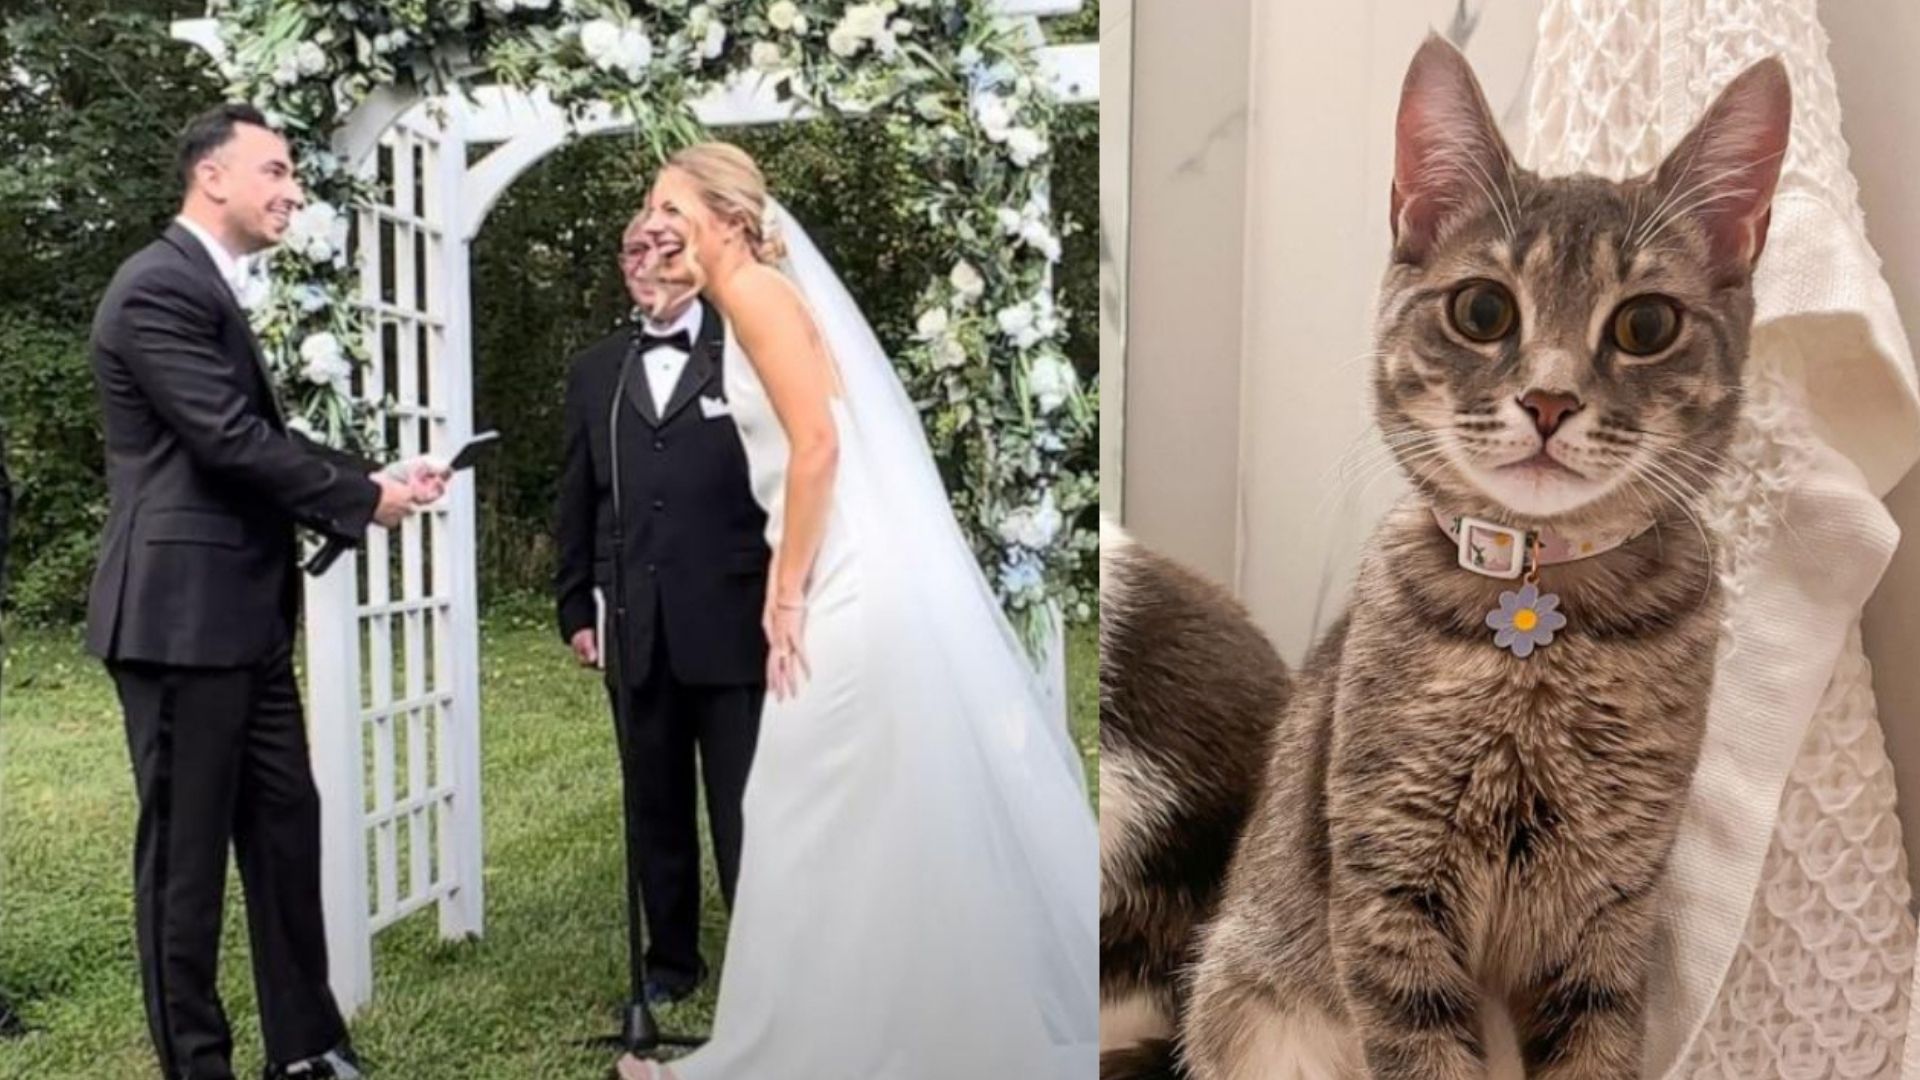 In the United States of America, a cat storms the wedding ceremony and is adopted by the bride and groom: “Loving and affectionate.”